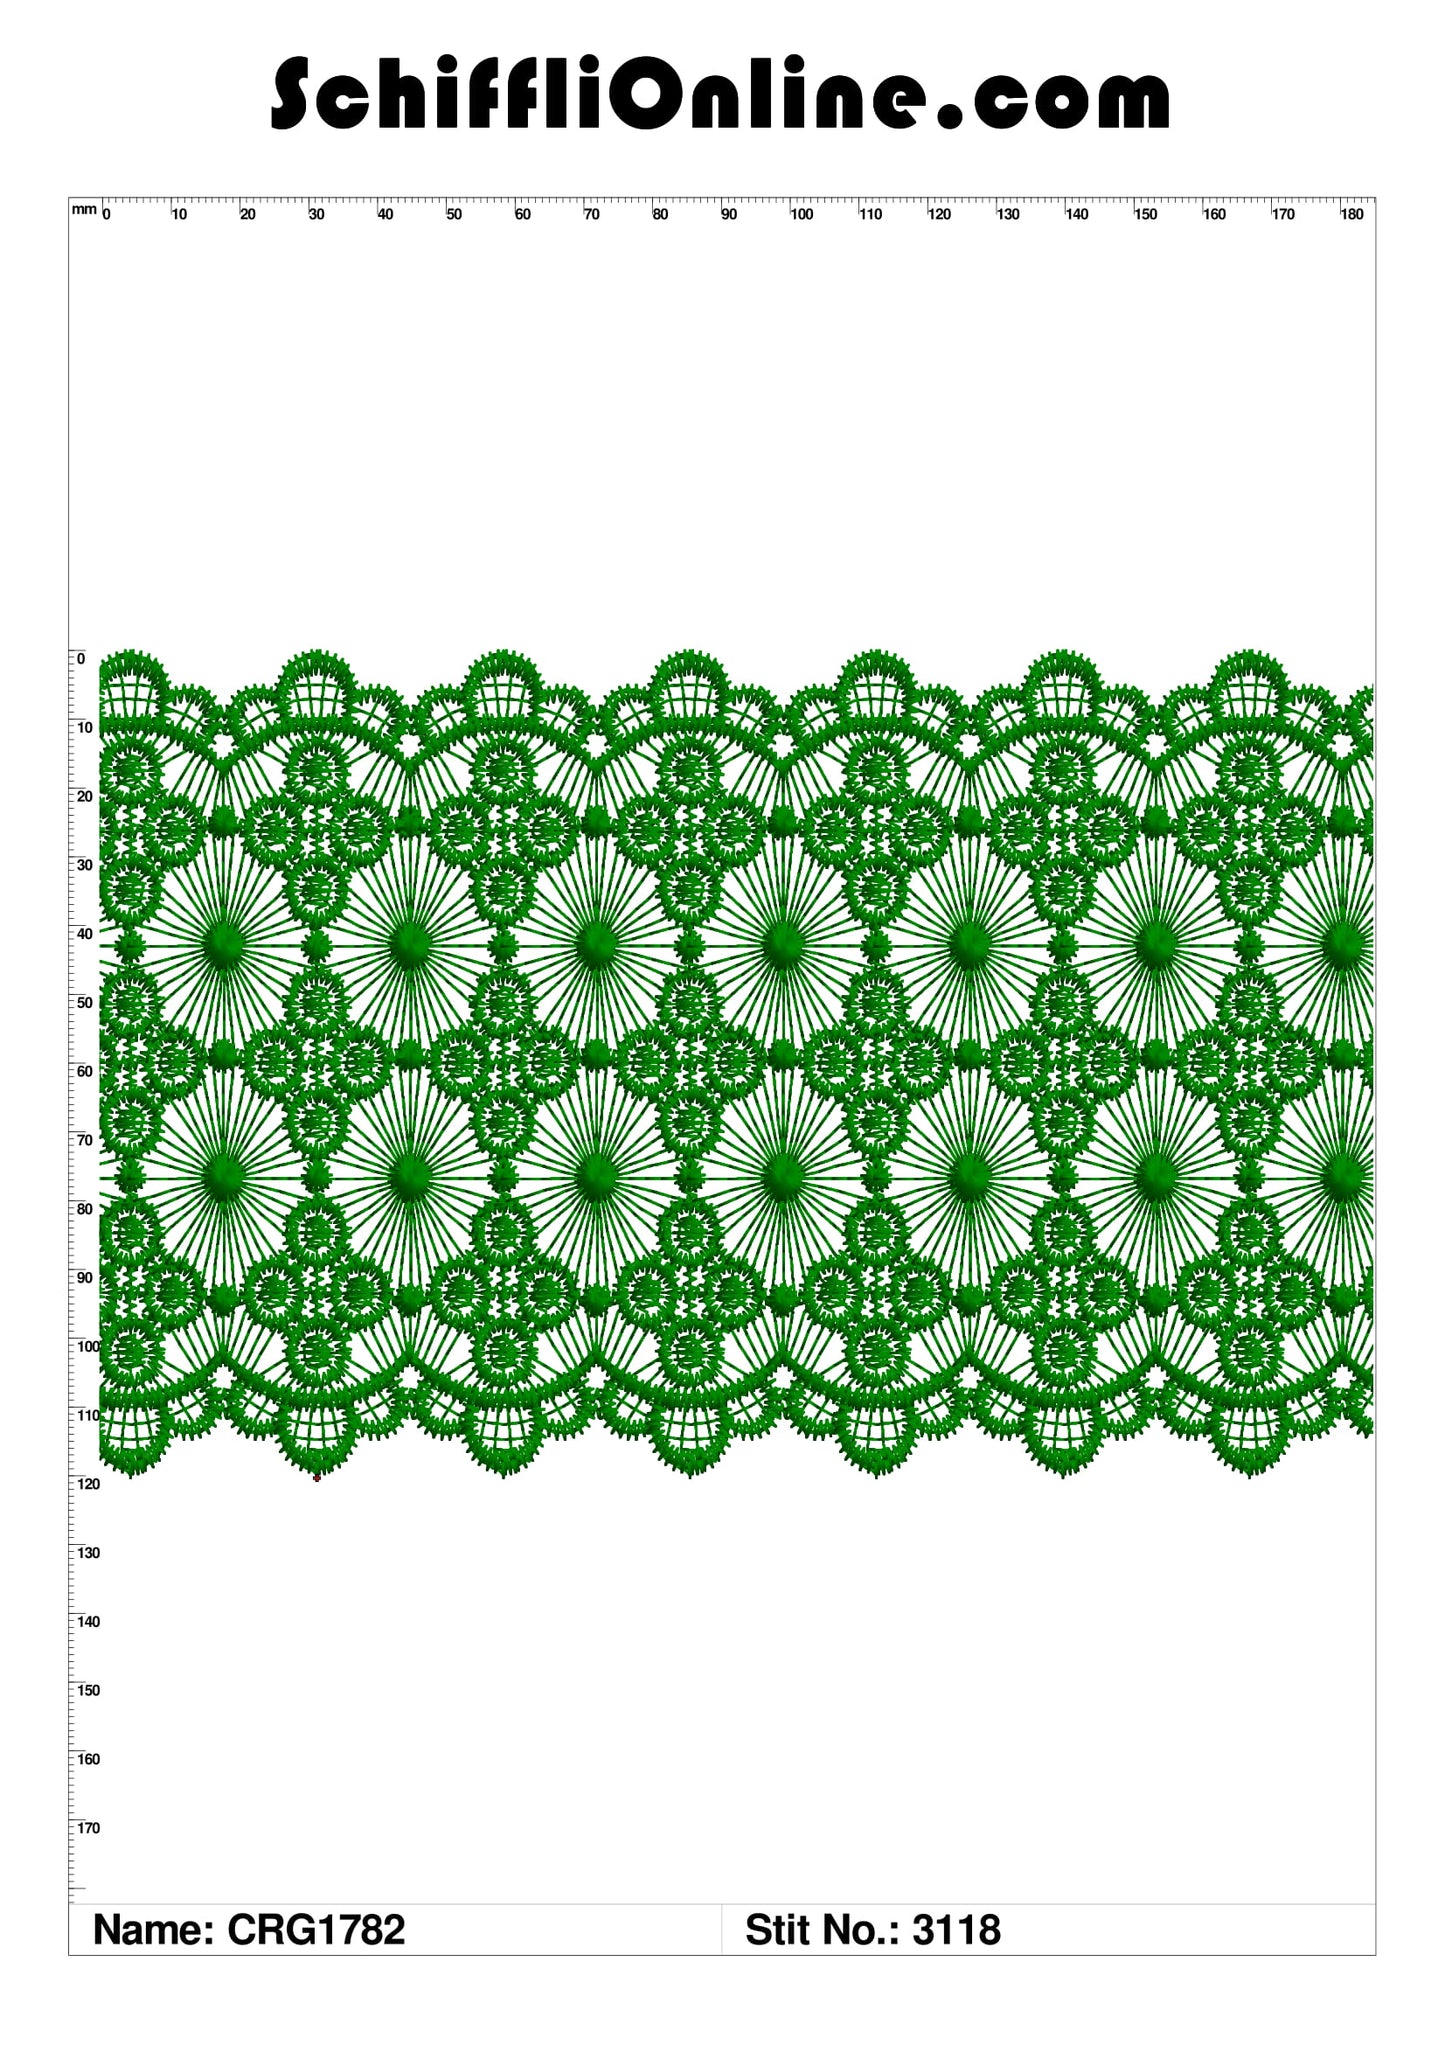 Book 134 CHEMICAL LACE 4X4 50 DESIGNS